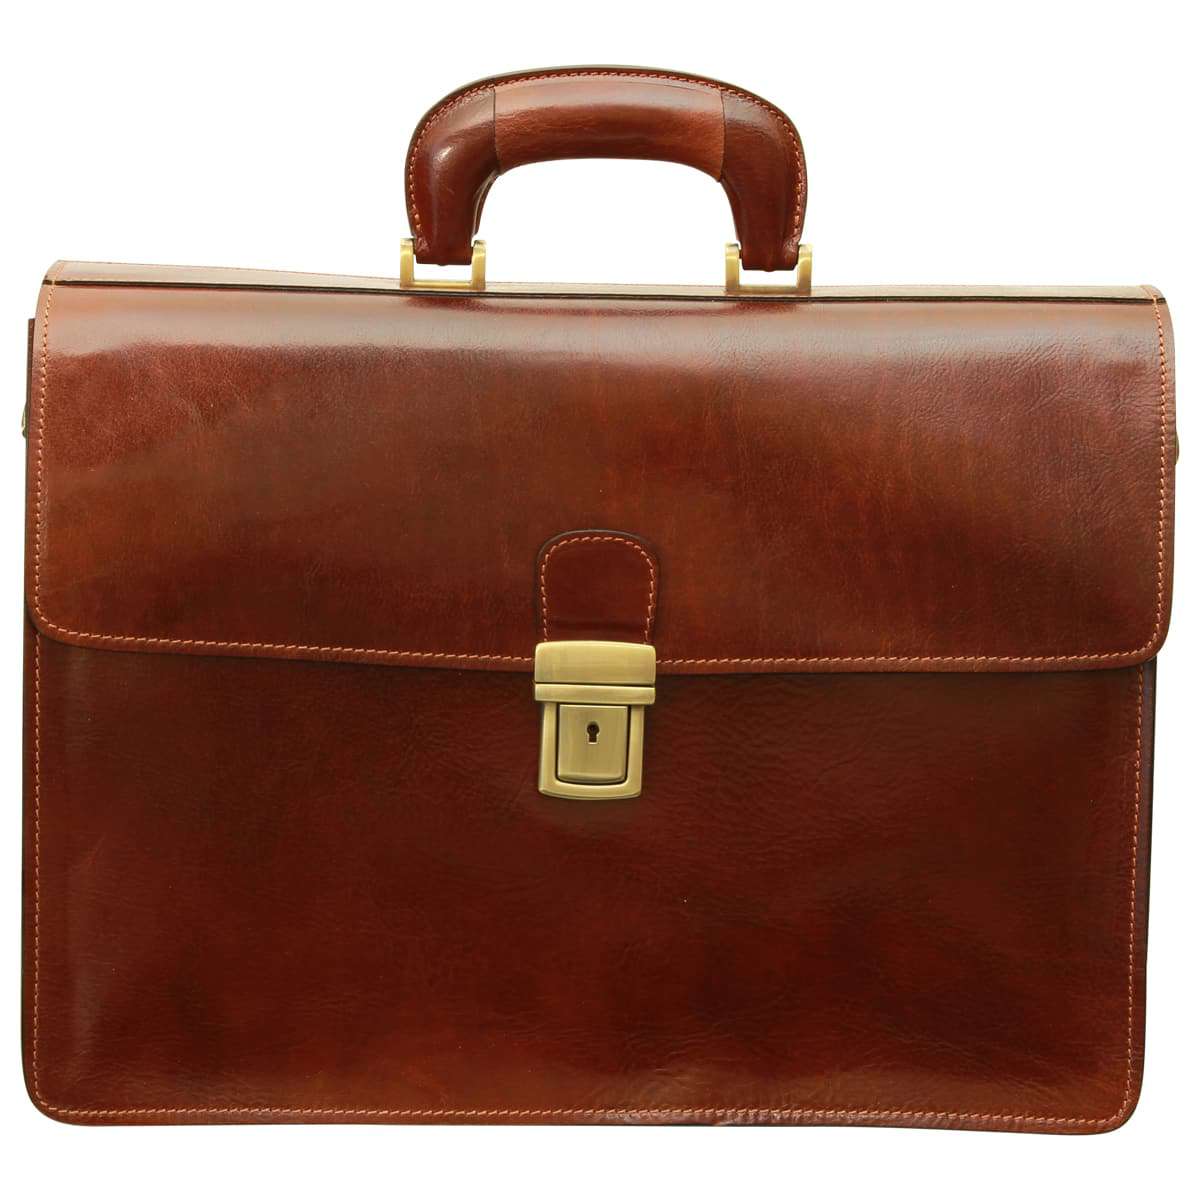 Leather Briefcase with secure clip closure - Brown | 077905MA | EURO | Old Angler Firenze